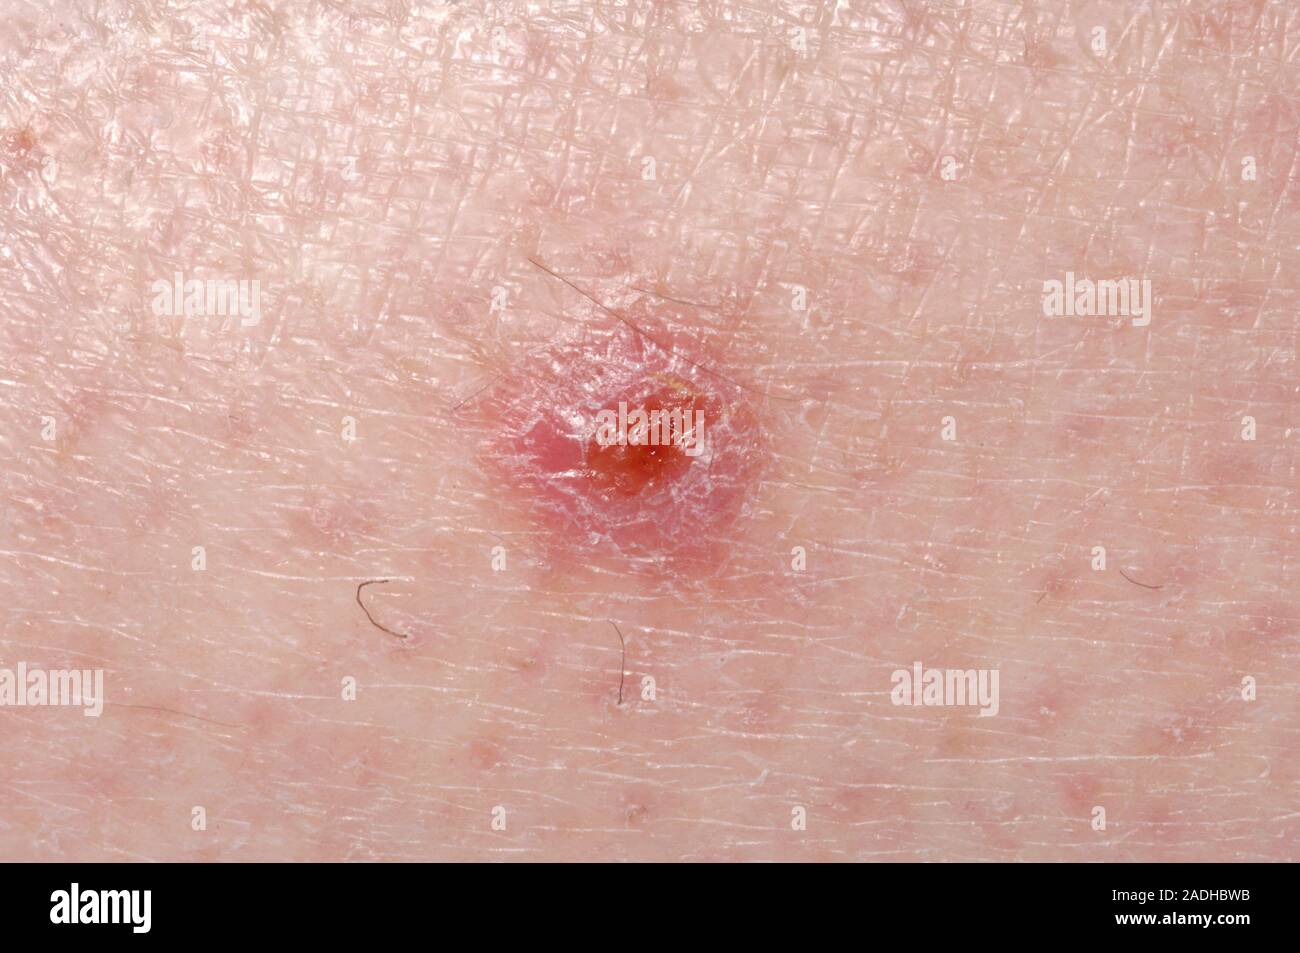 Skin Cancer Ulcerated Basal Cell Carcinoma On A 71 Year Old Womans